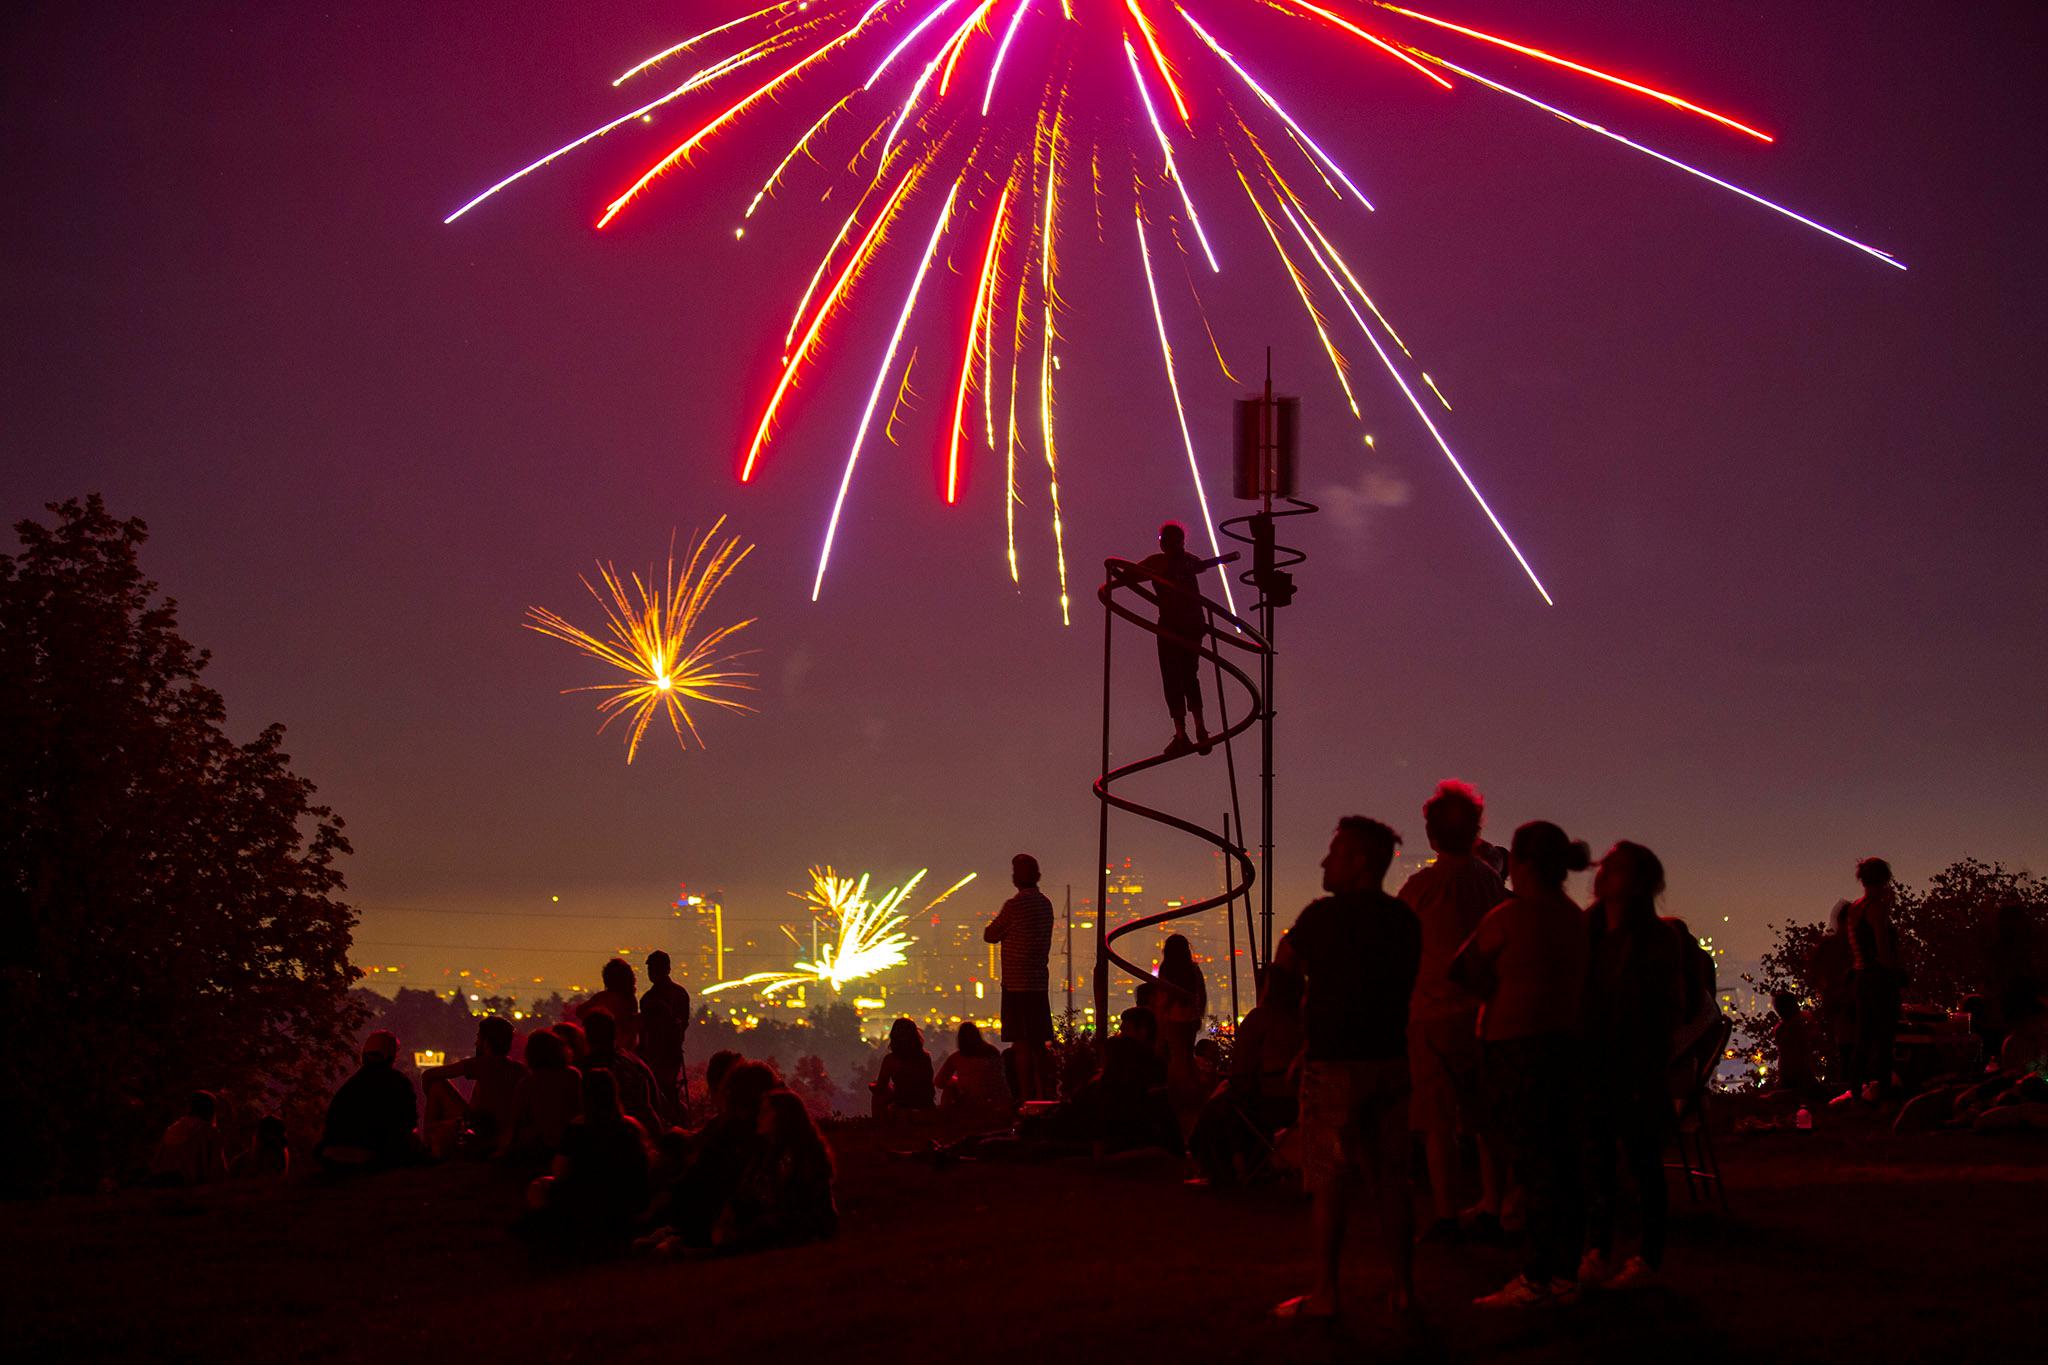 People are silhouetted by the glow of red exploding fireworks behind them — beyond the hill where they're standing, it's obvious more are going off in the distance.